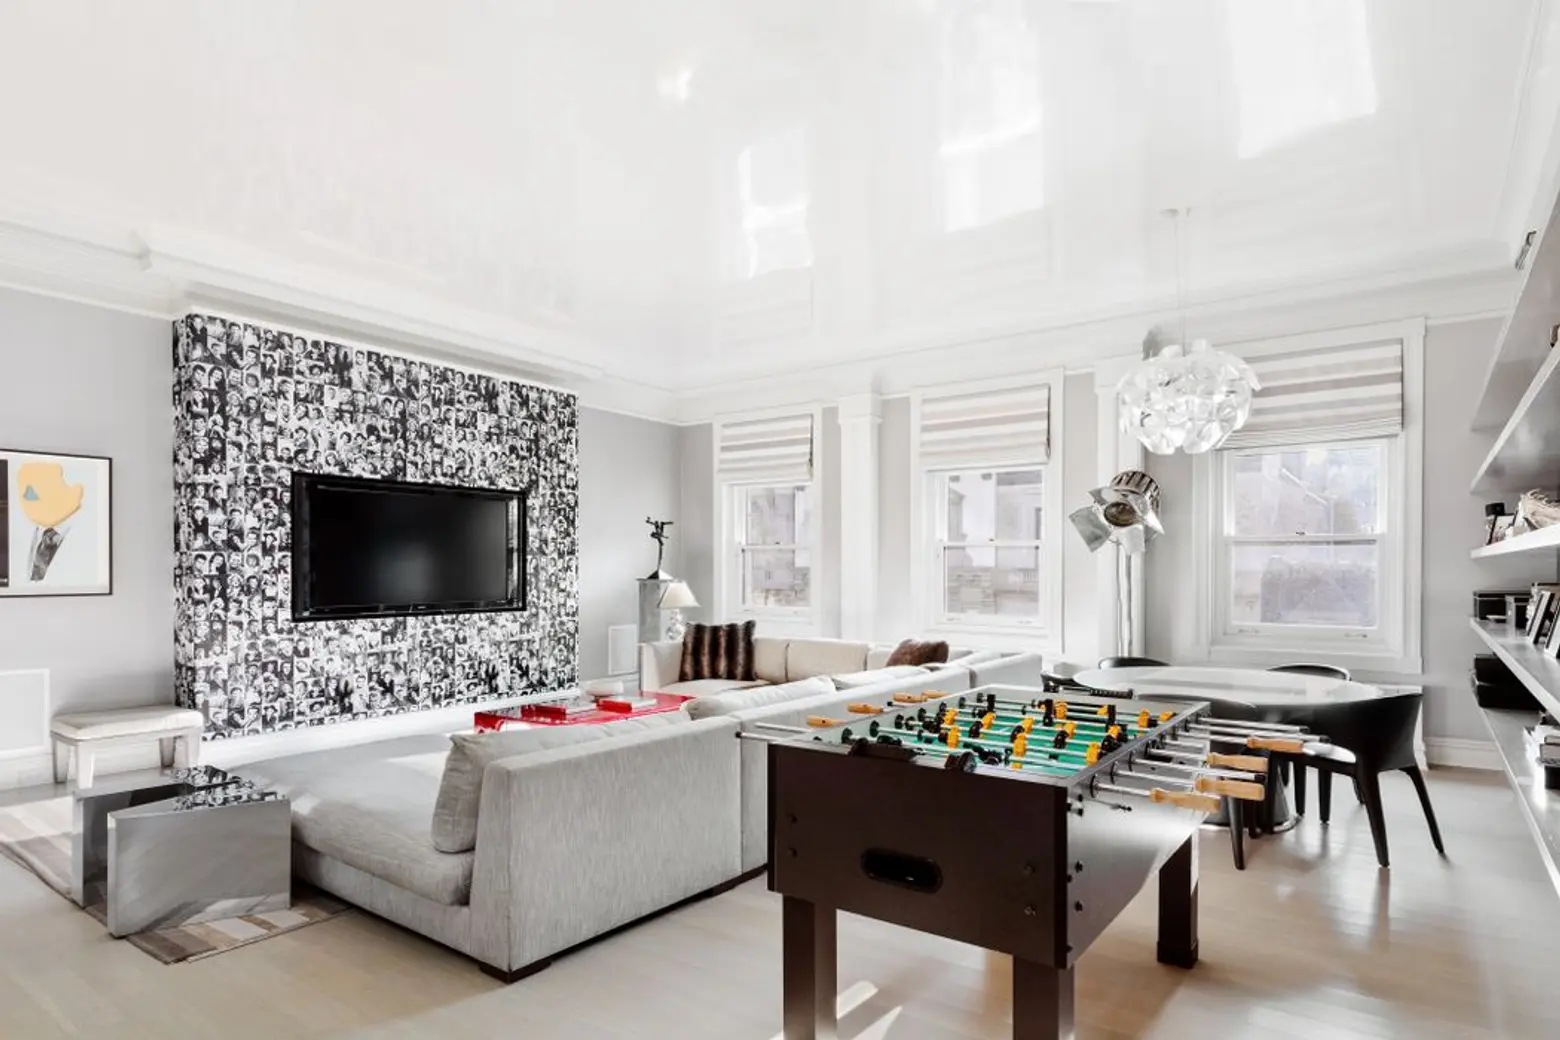 11 East 82nd Street, upper east side, mansions, townhouses, celebrities, cool listings